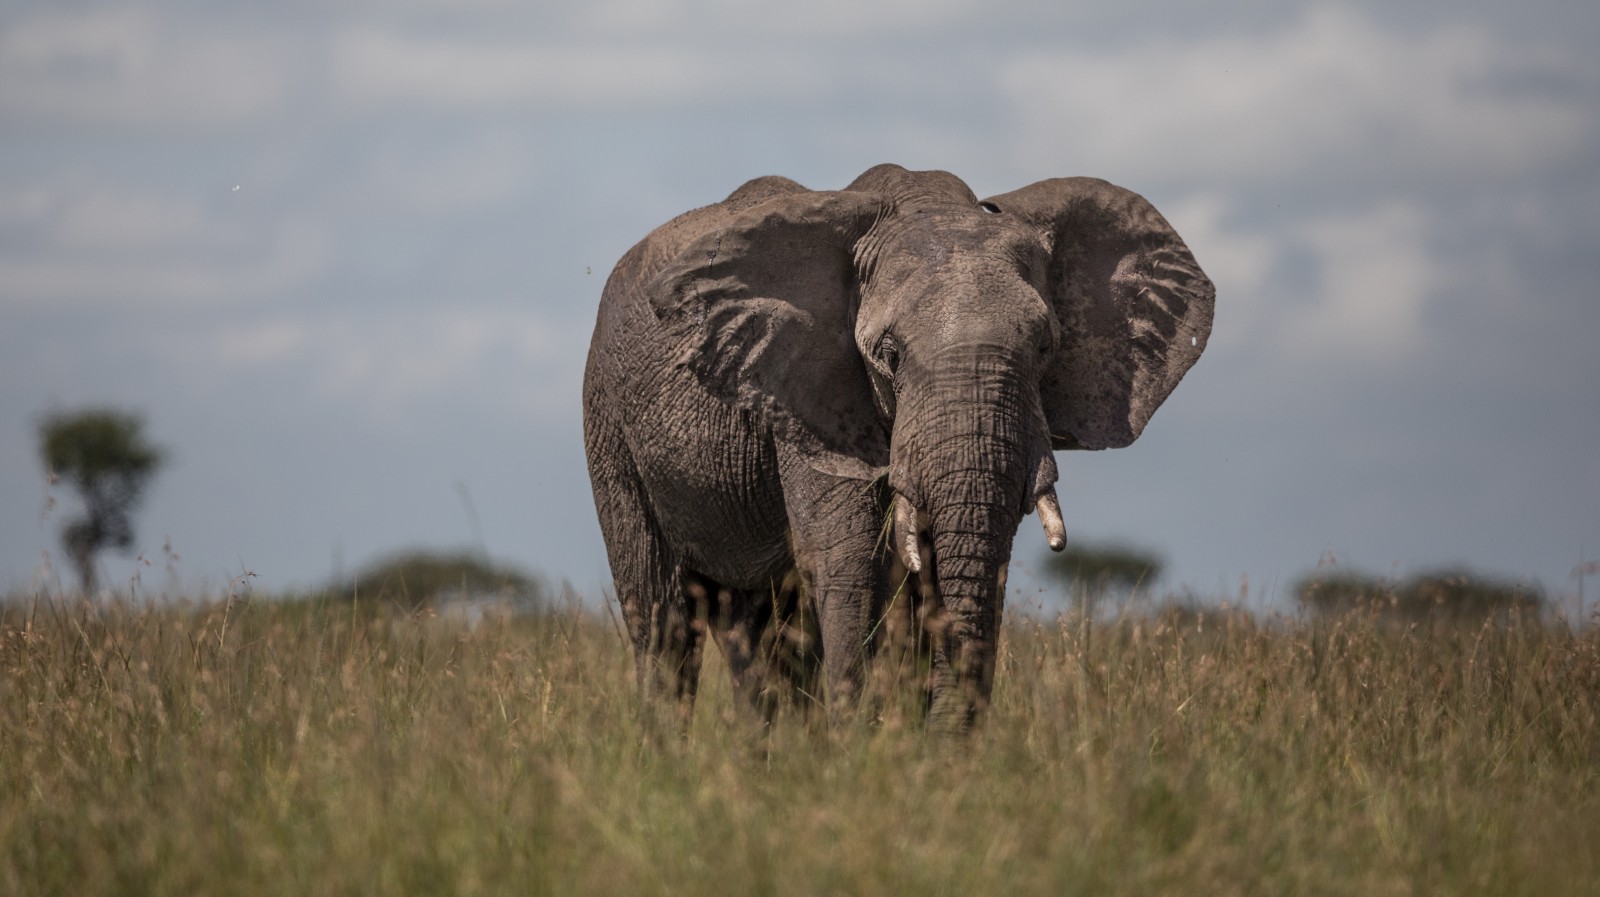 A photo of a large adult African elephant with huge tusks, standing in the bush